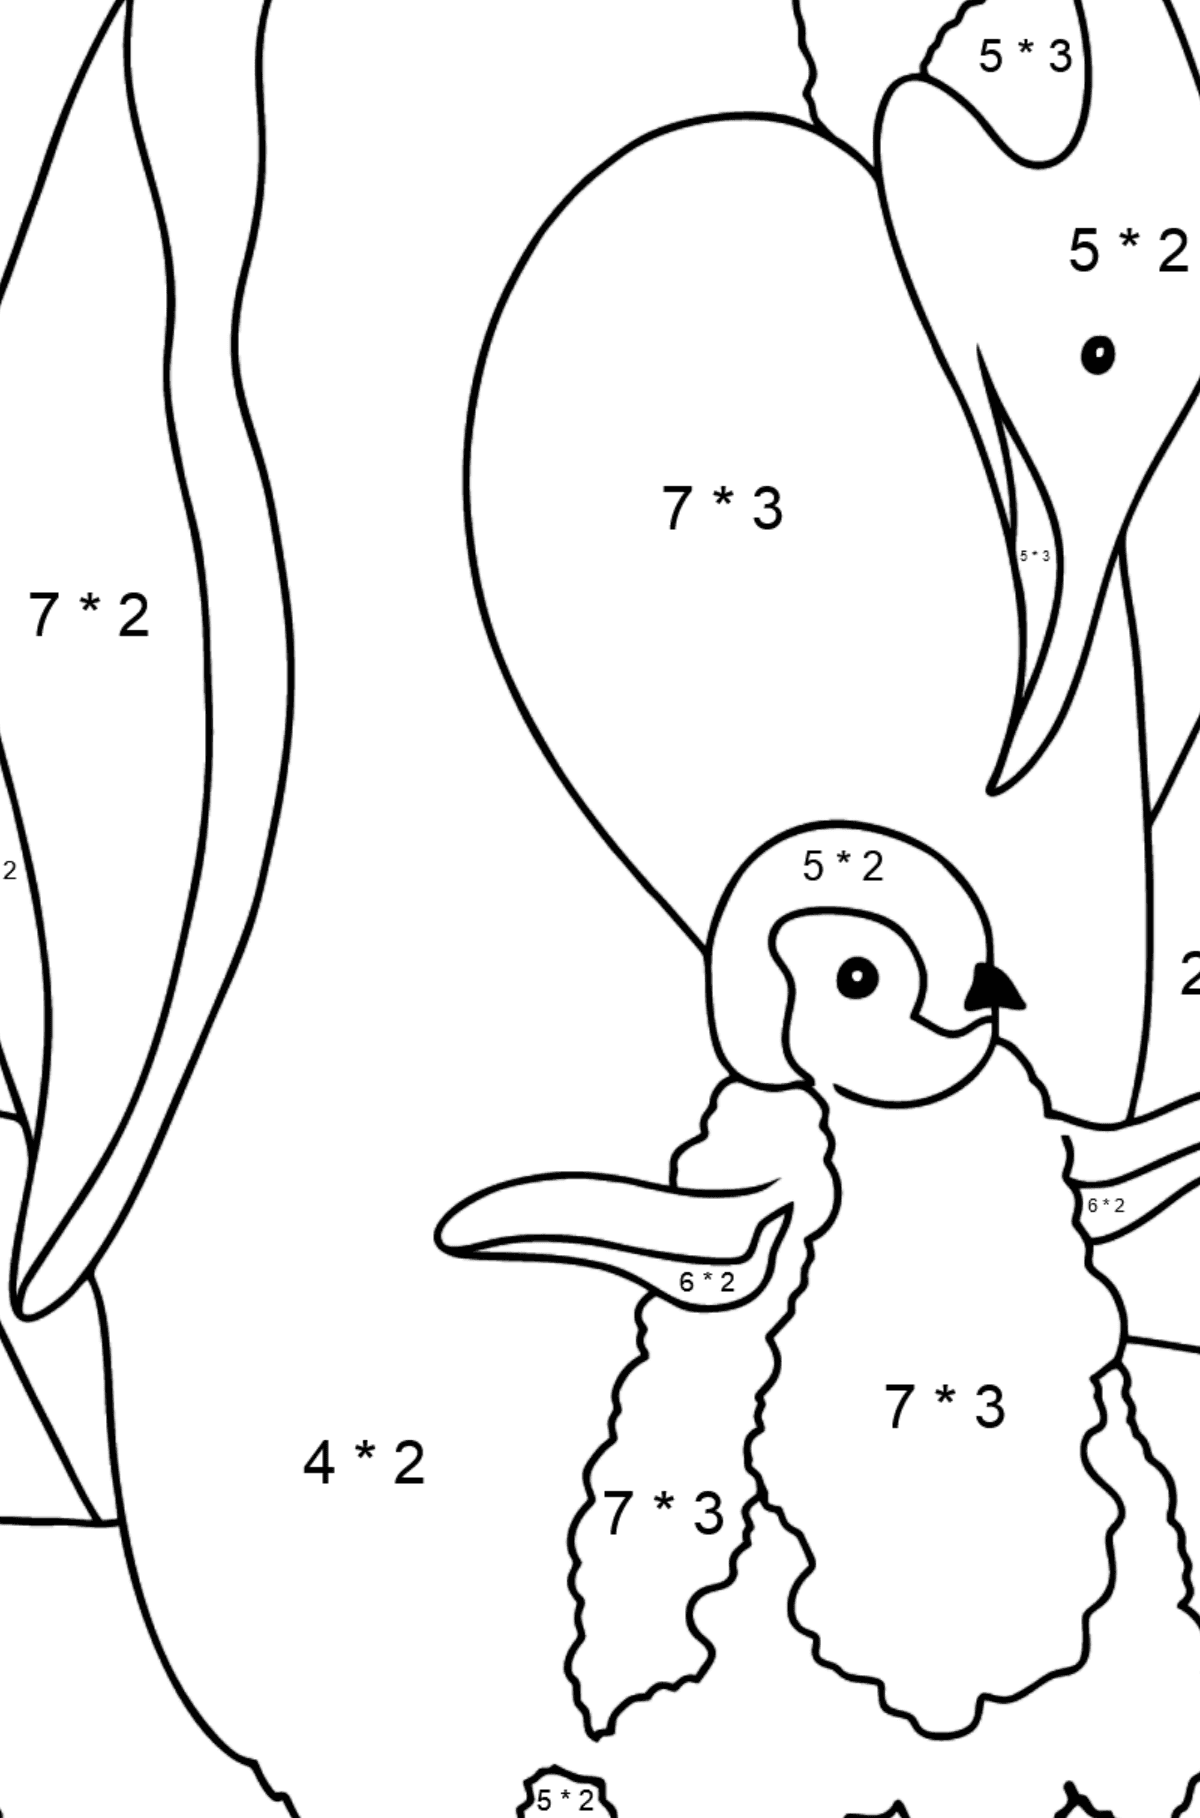 Coloring Page - A Penguin with a Baby - Math Coloring - Multiplication for Kids